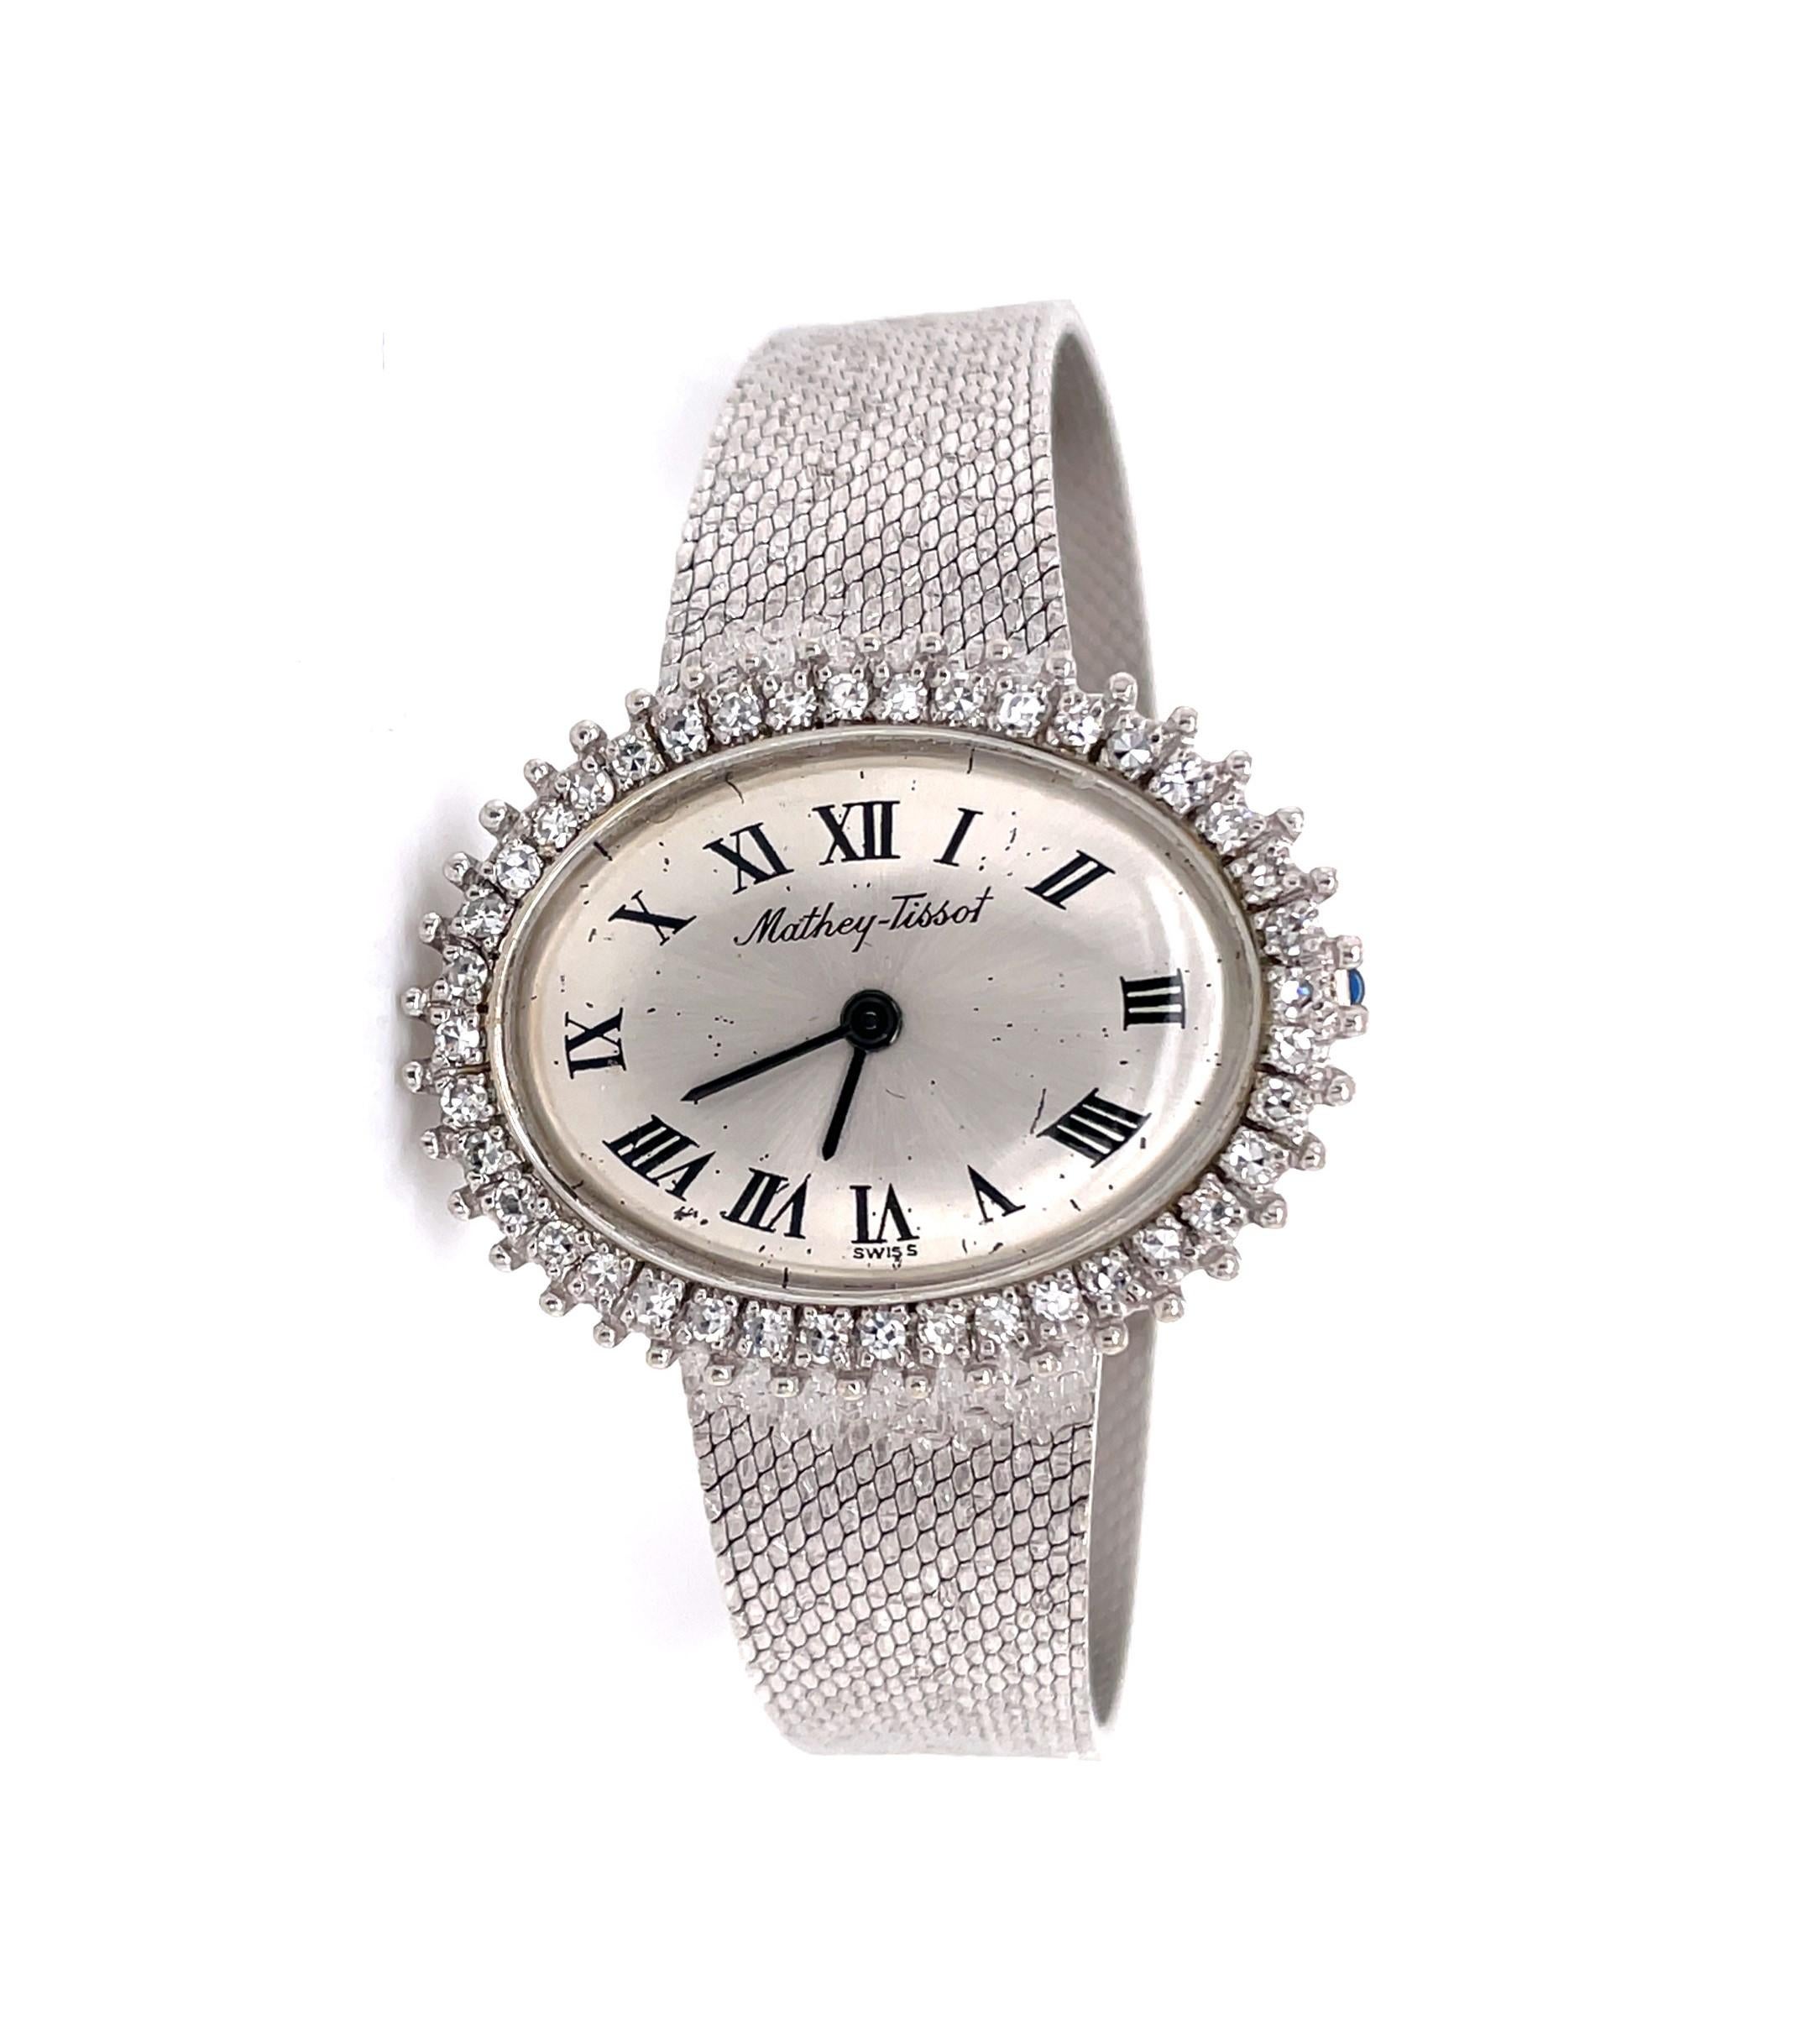 With its stunning diamond framed oval watch dial, this fabulous Mathey-Tissot Dress Watch certainly sparkles with 1.25 carat H/VS diamonds and commands plenty of attention. The fluid high-toned fourteen karat 14k white gold 6-1/2 inch bracelet band